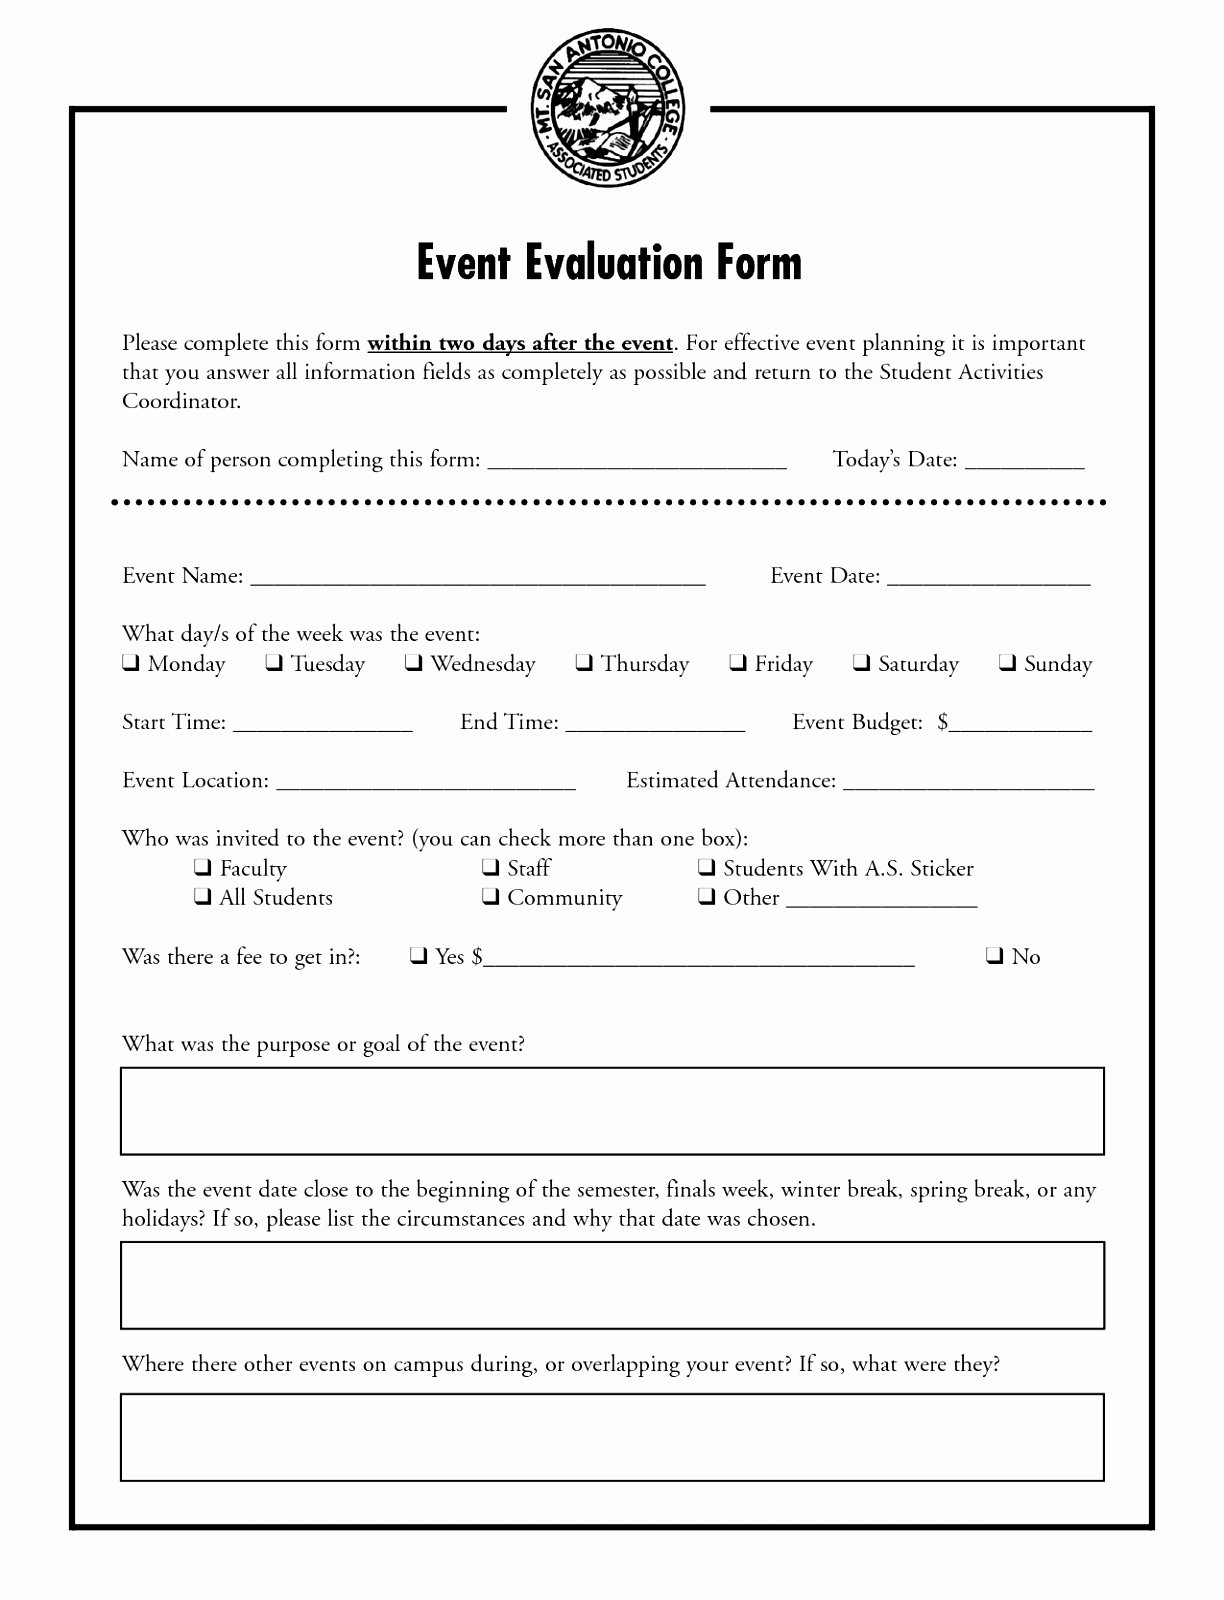 Event Survey Template Word Fresh 6 Evaluation form Template for events Pwwiu